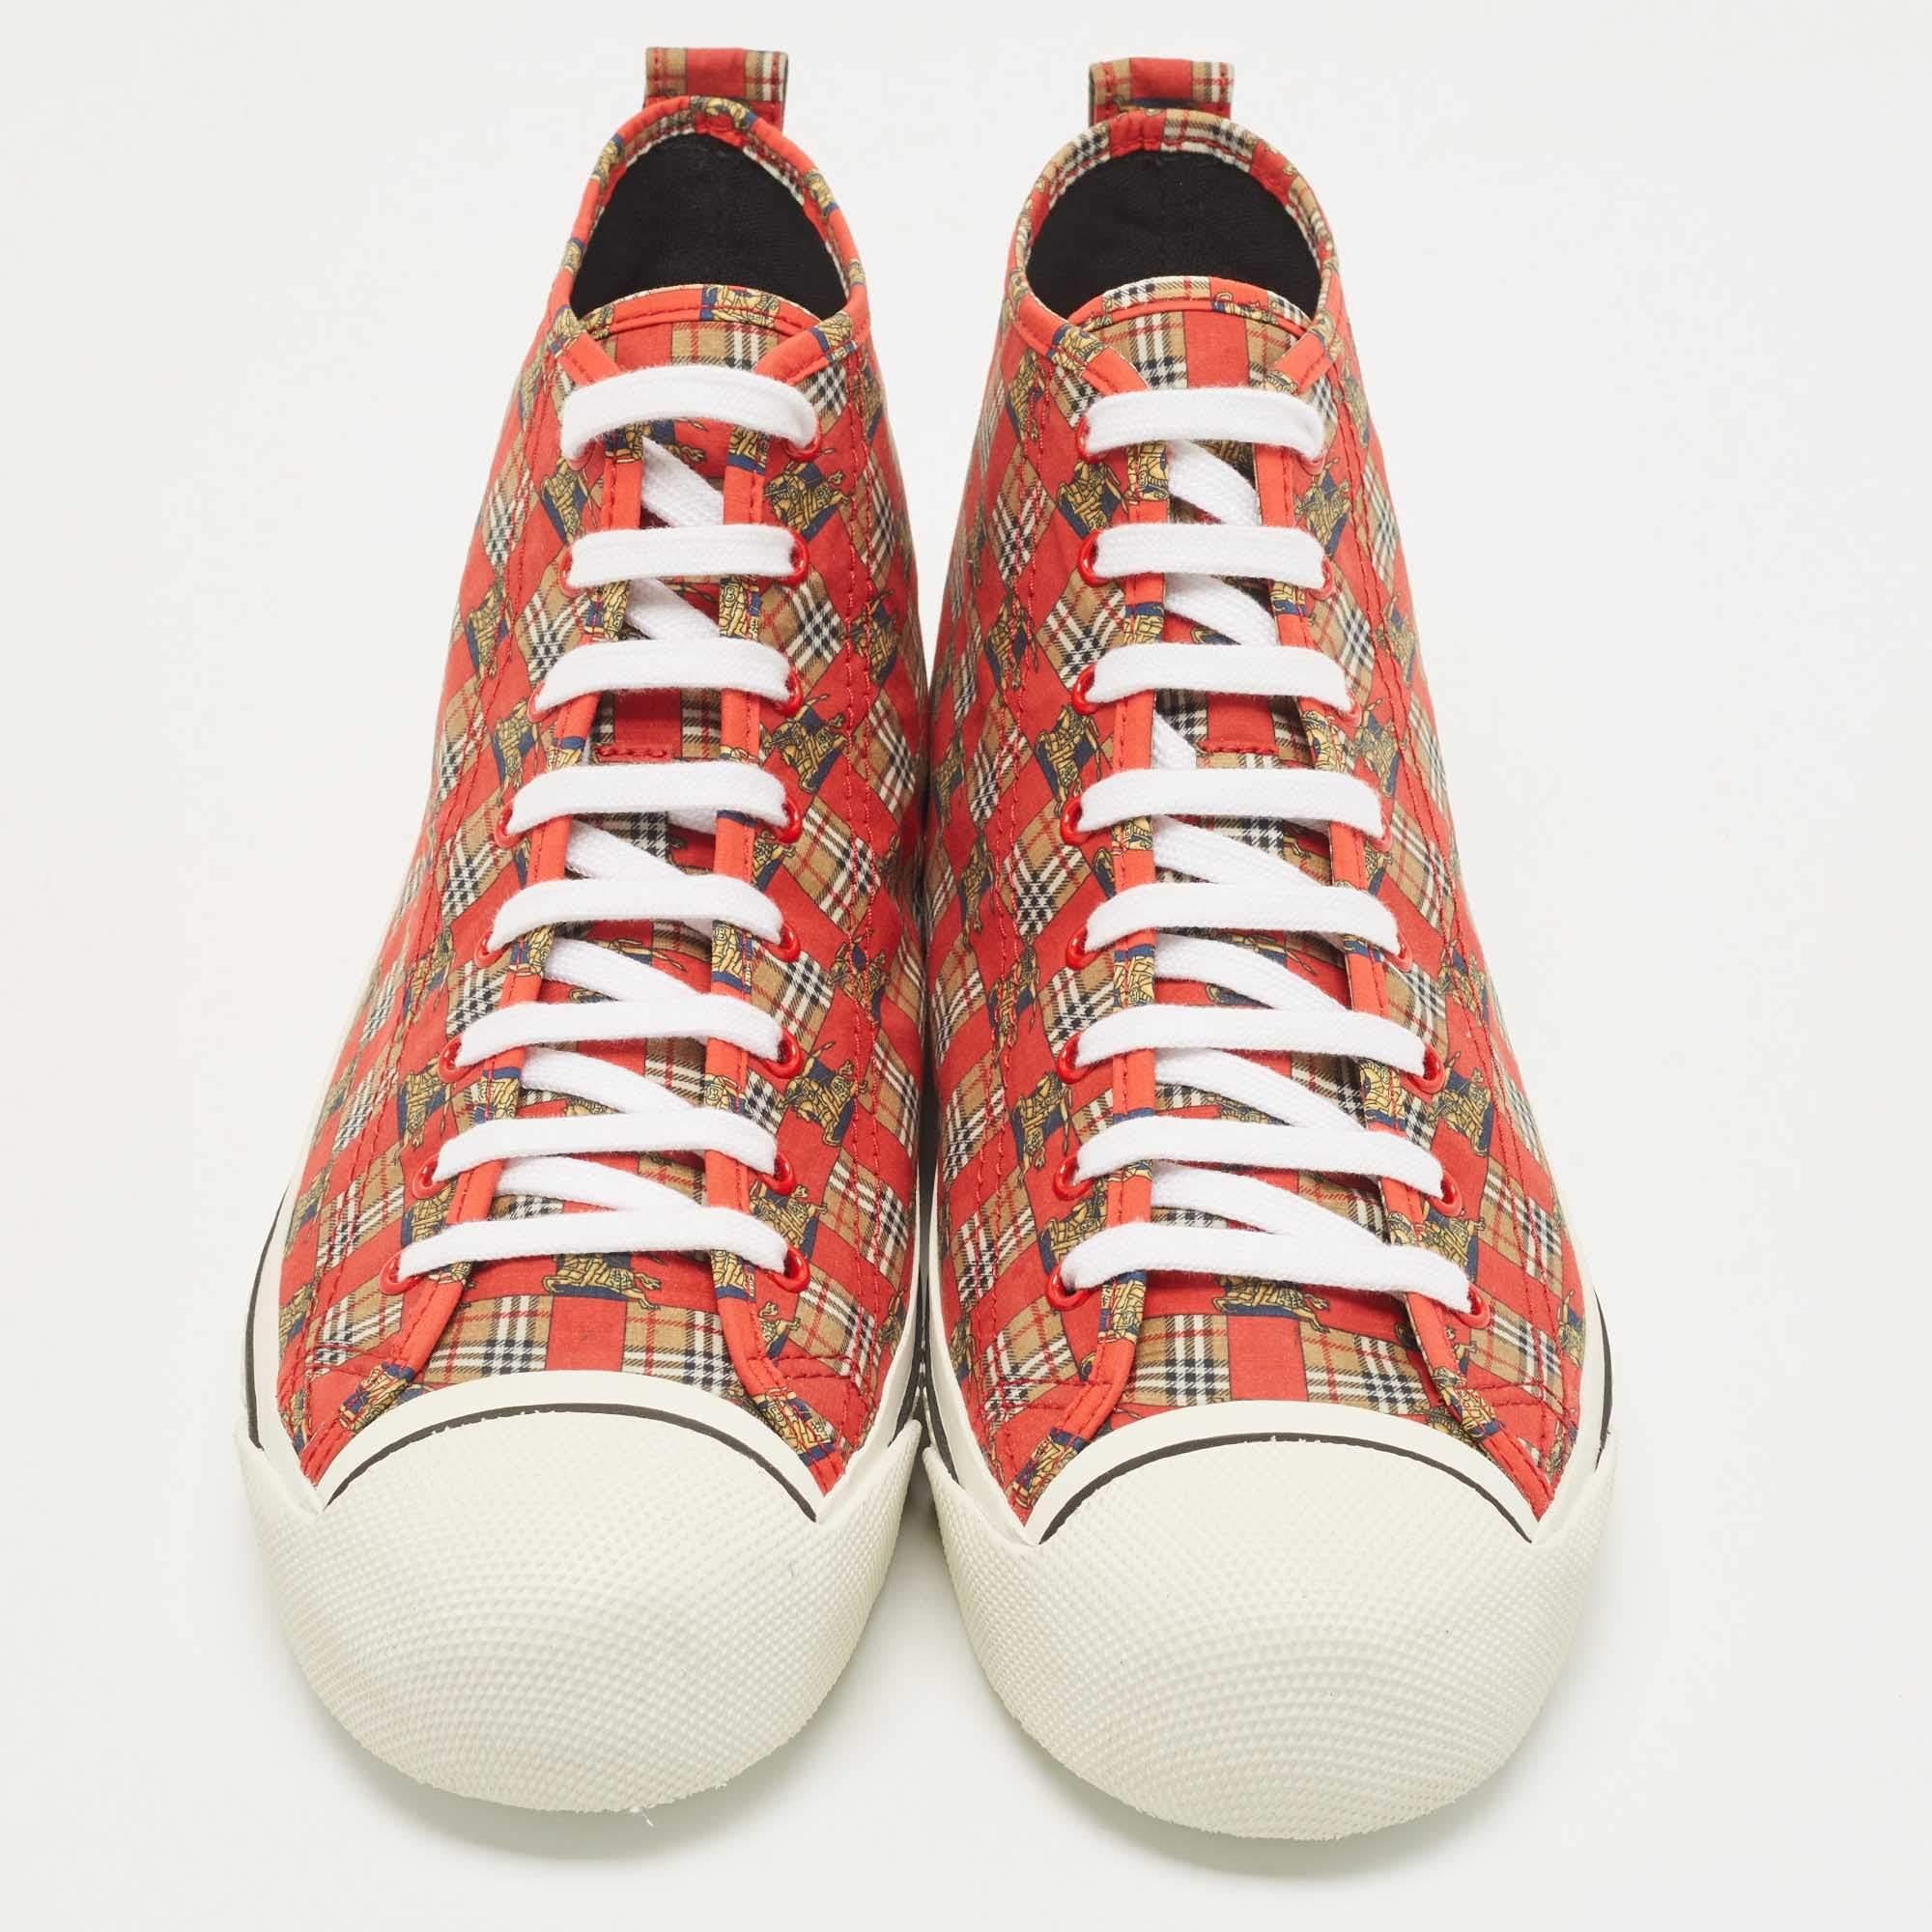 Burberry Red/Beige Canvas Kingly Print High Top Sneakers Size 45 In New Condition For Sale In Dubai, Al Qouz 2